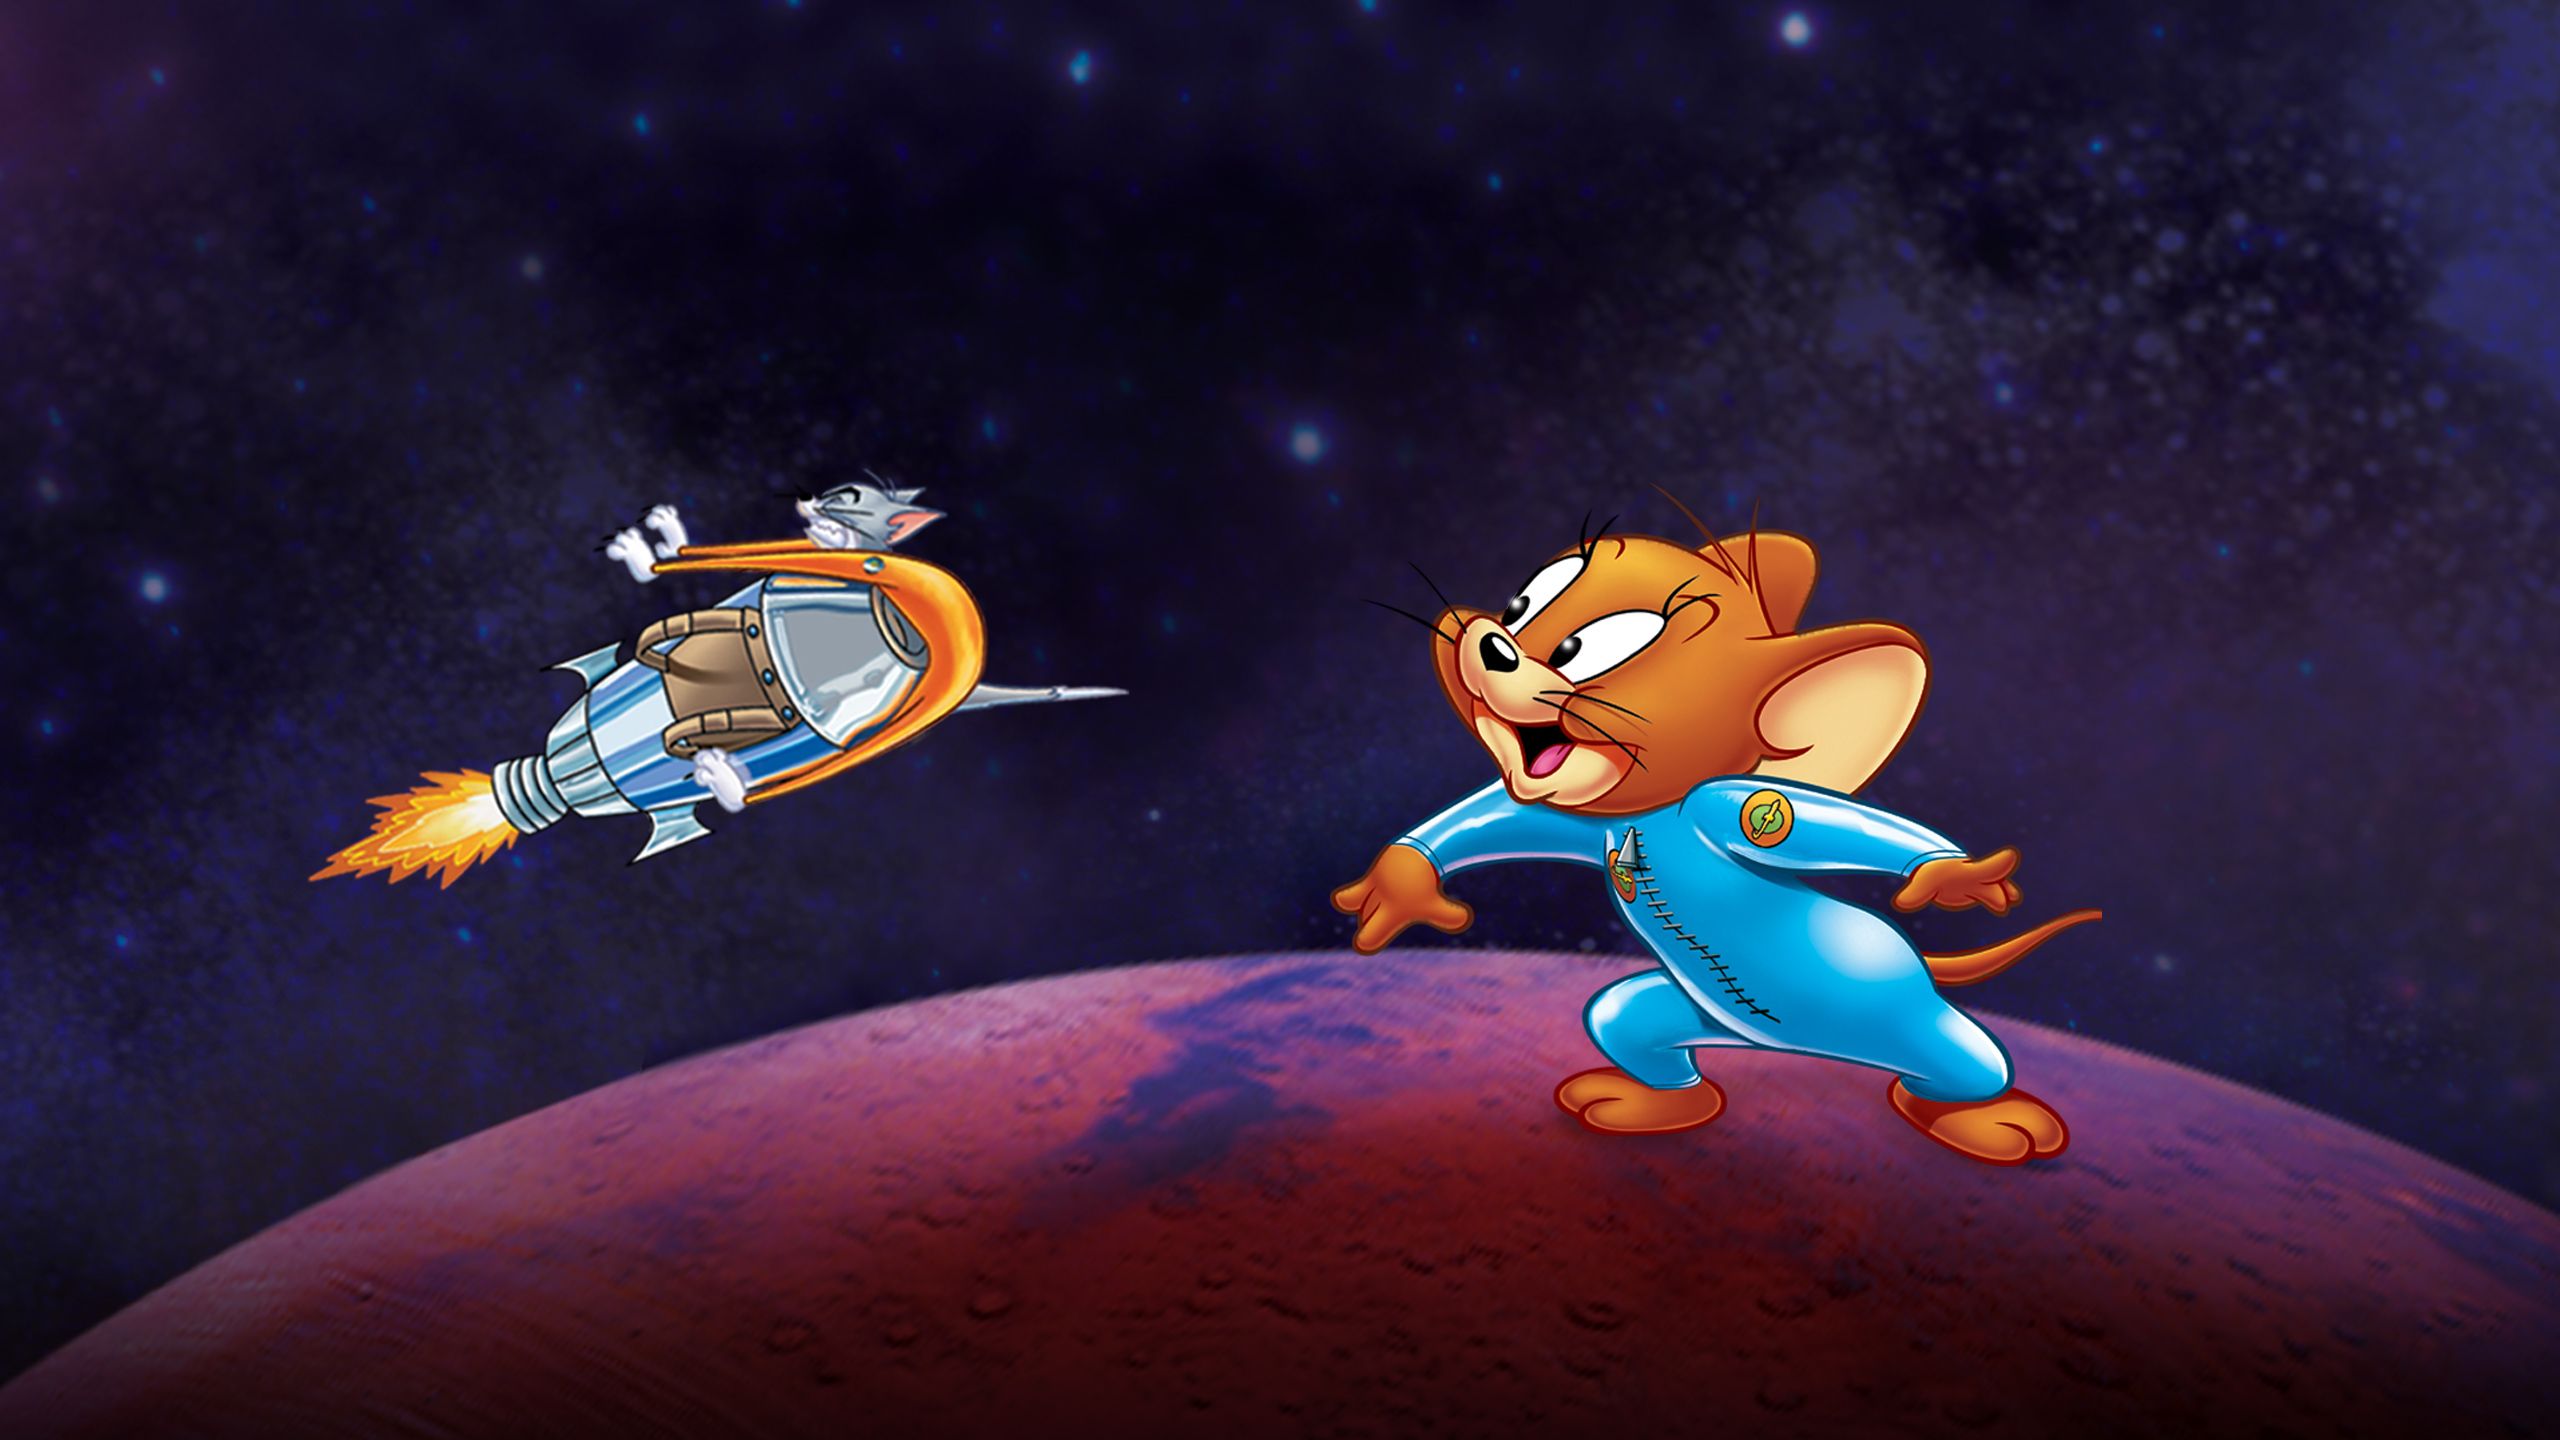 tom and jerry blast off to mars poster